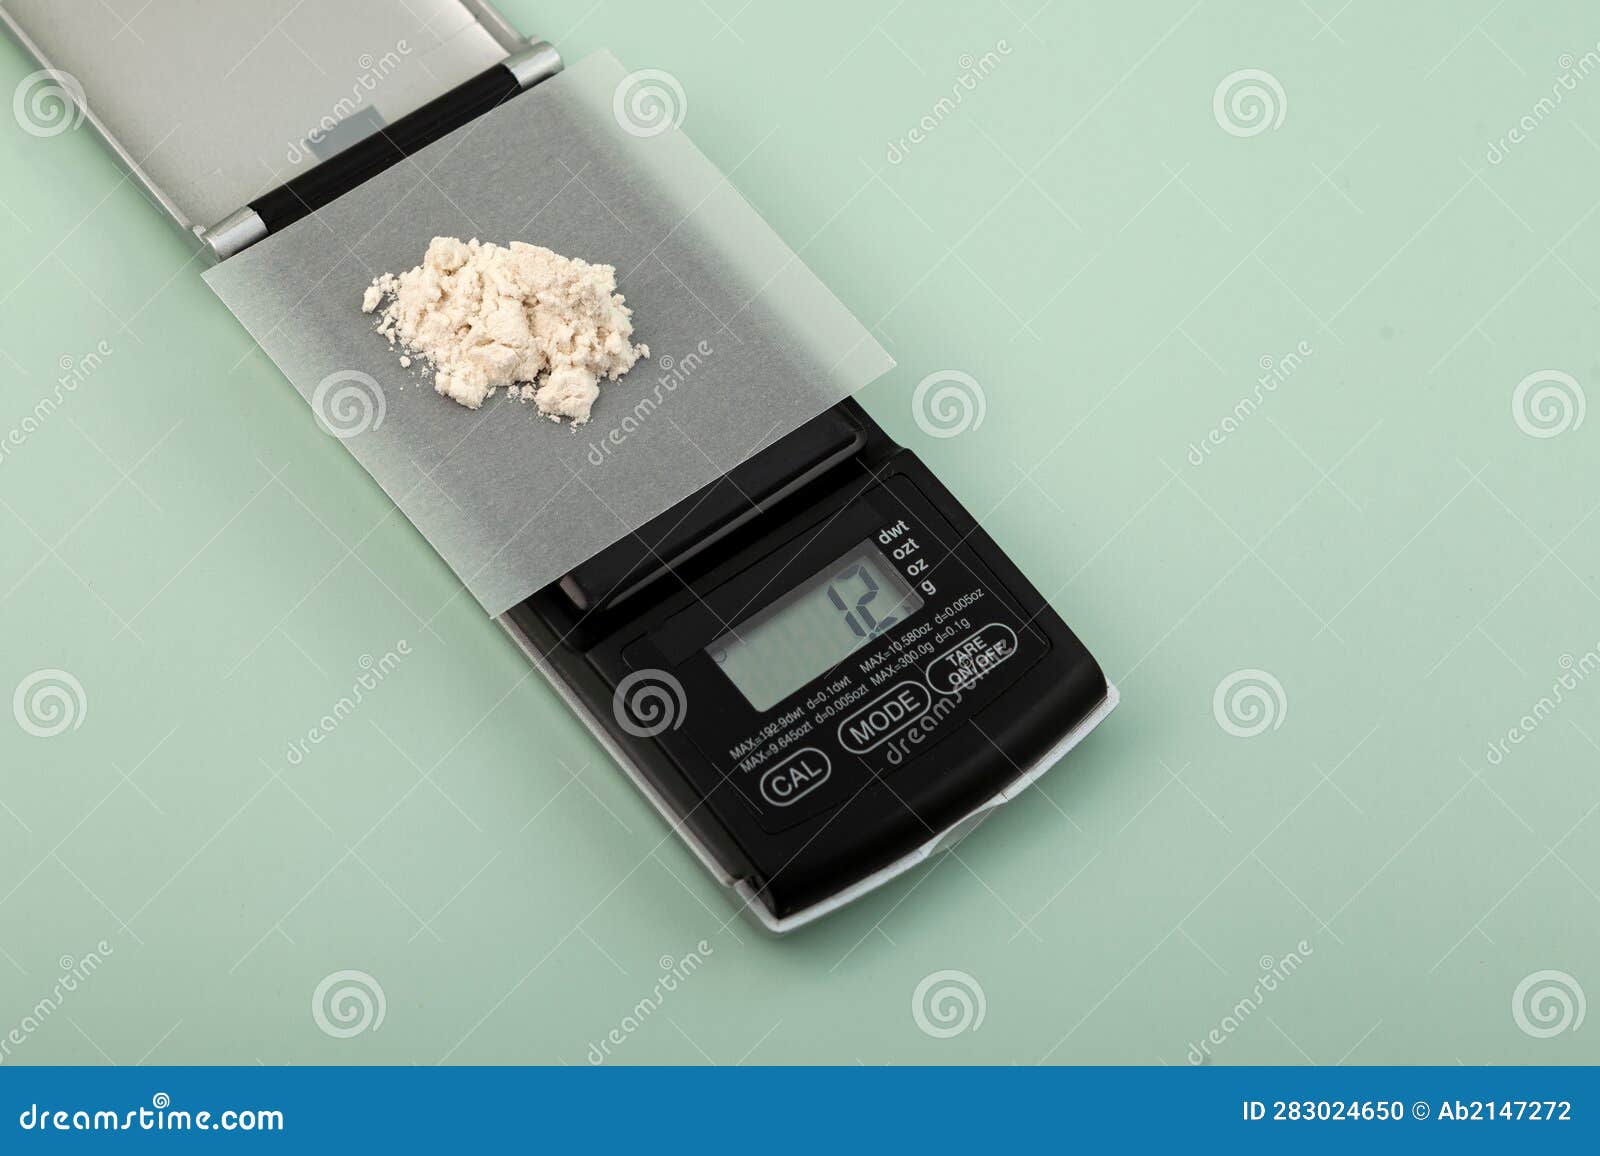 Gram scale Cut Out Stock Images & Pictures - Alamy